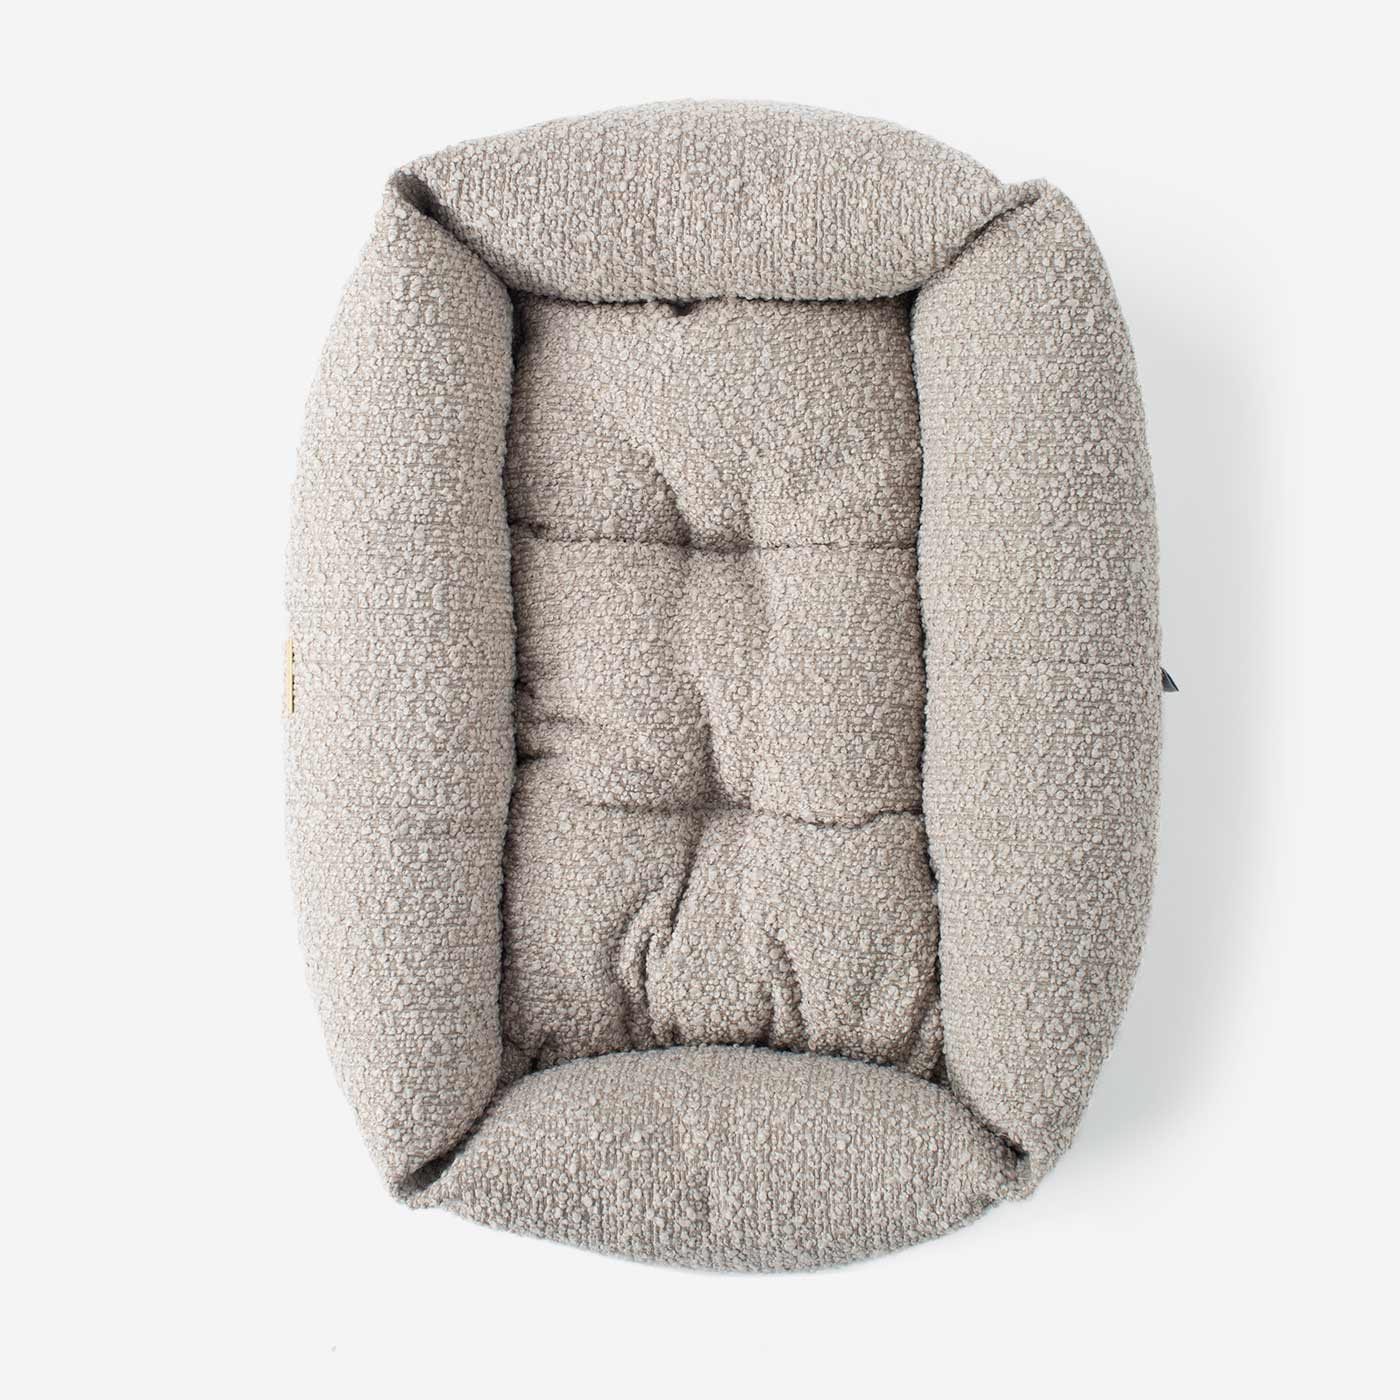 Cozy & Calm Puppy Cage Bed, The Perfect Dog Cage Accessory For The Ultimate Dog Den! In Stunning Mink Boucle! Available Now at Lords & Labradors US